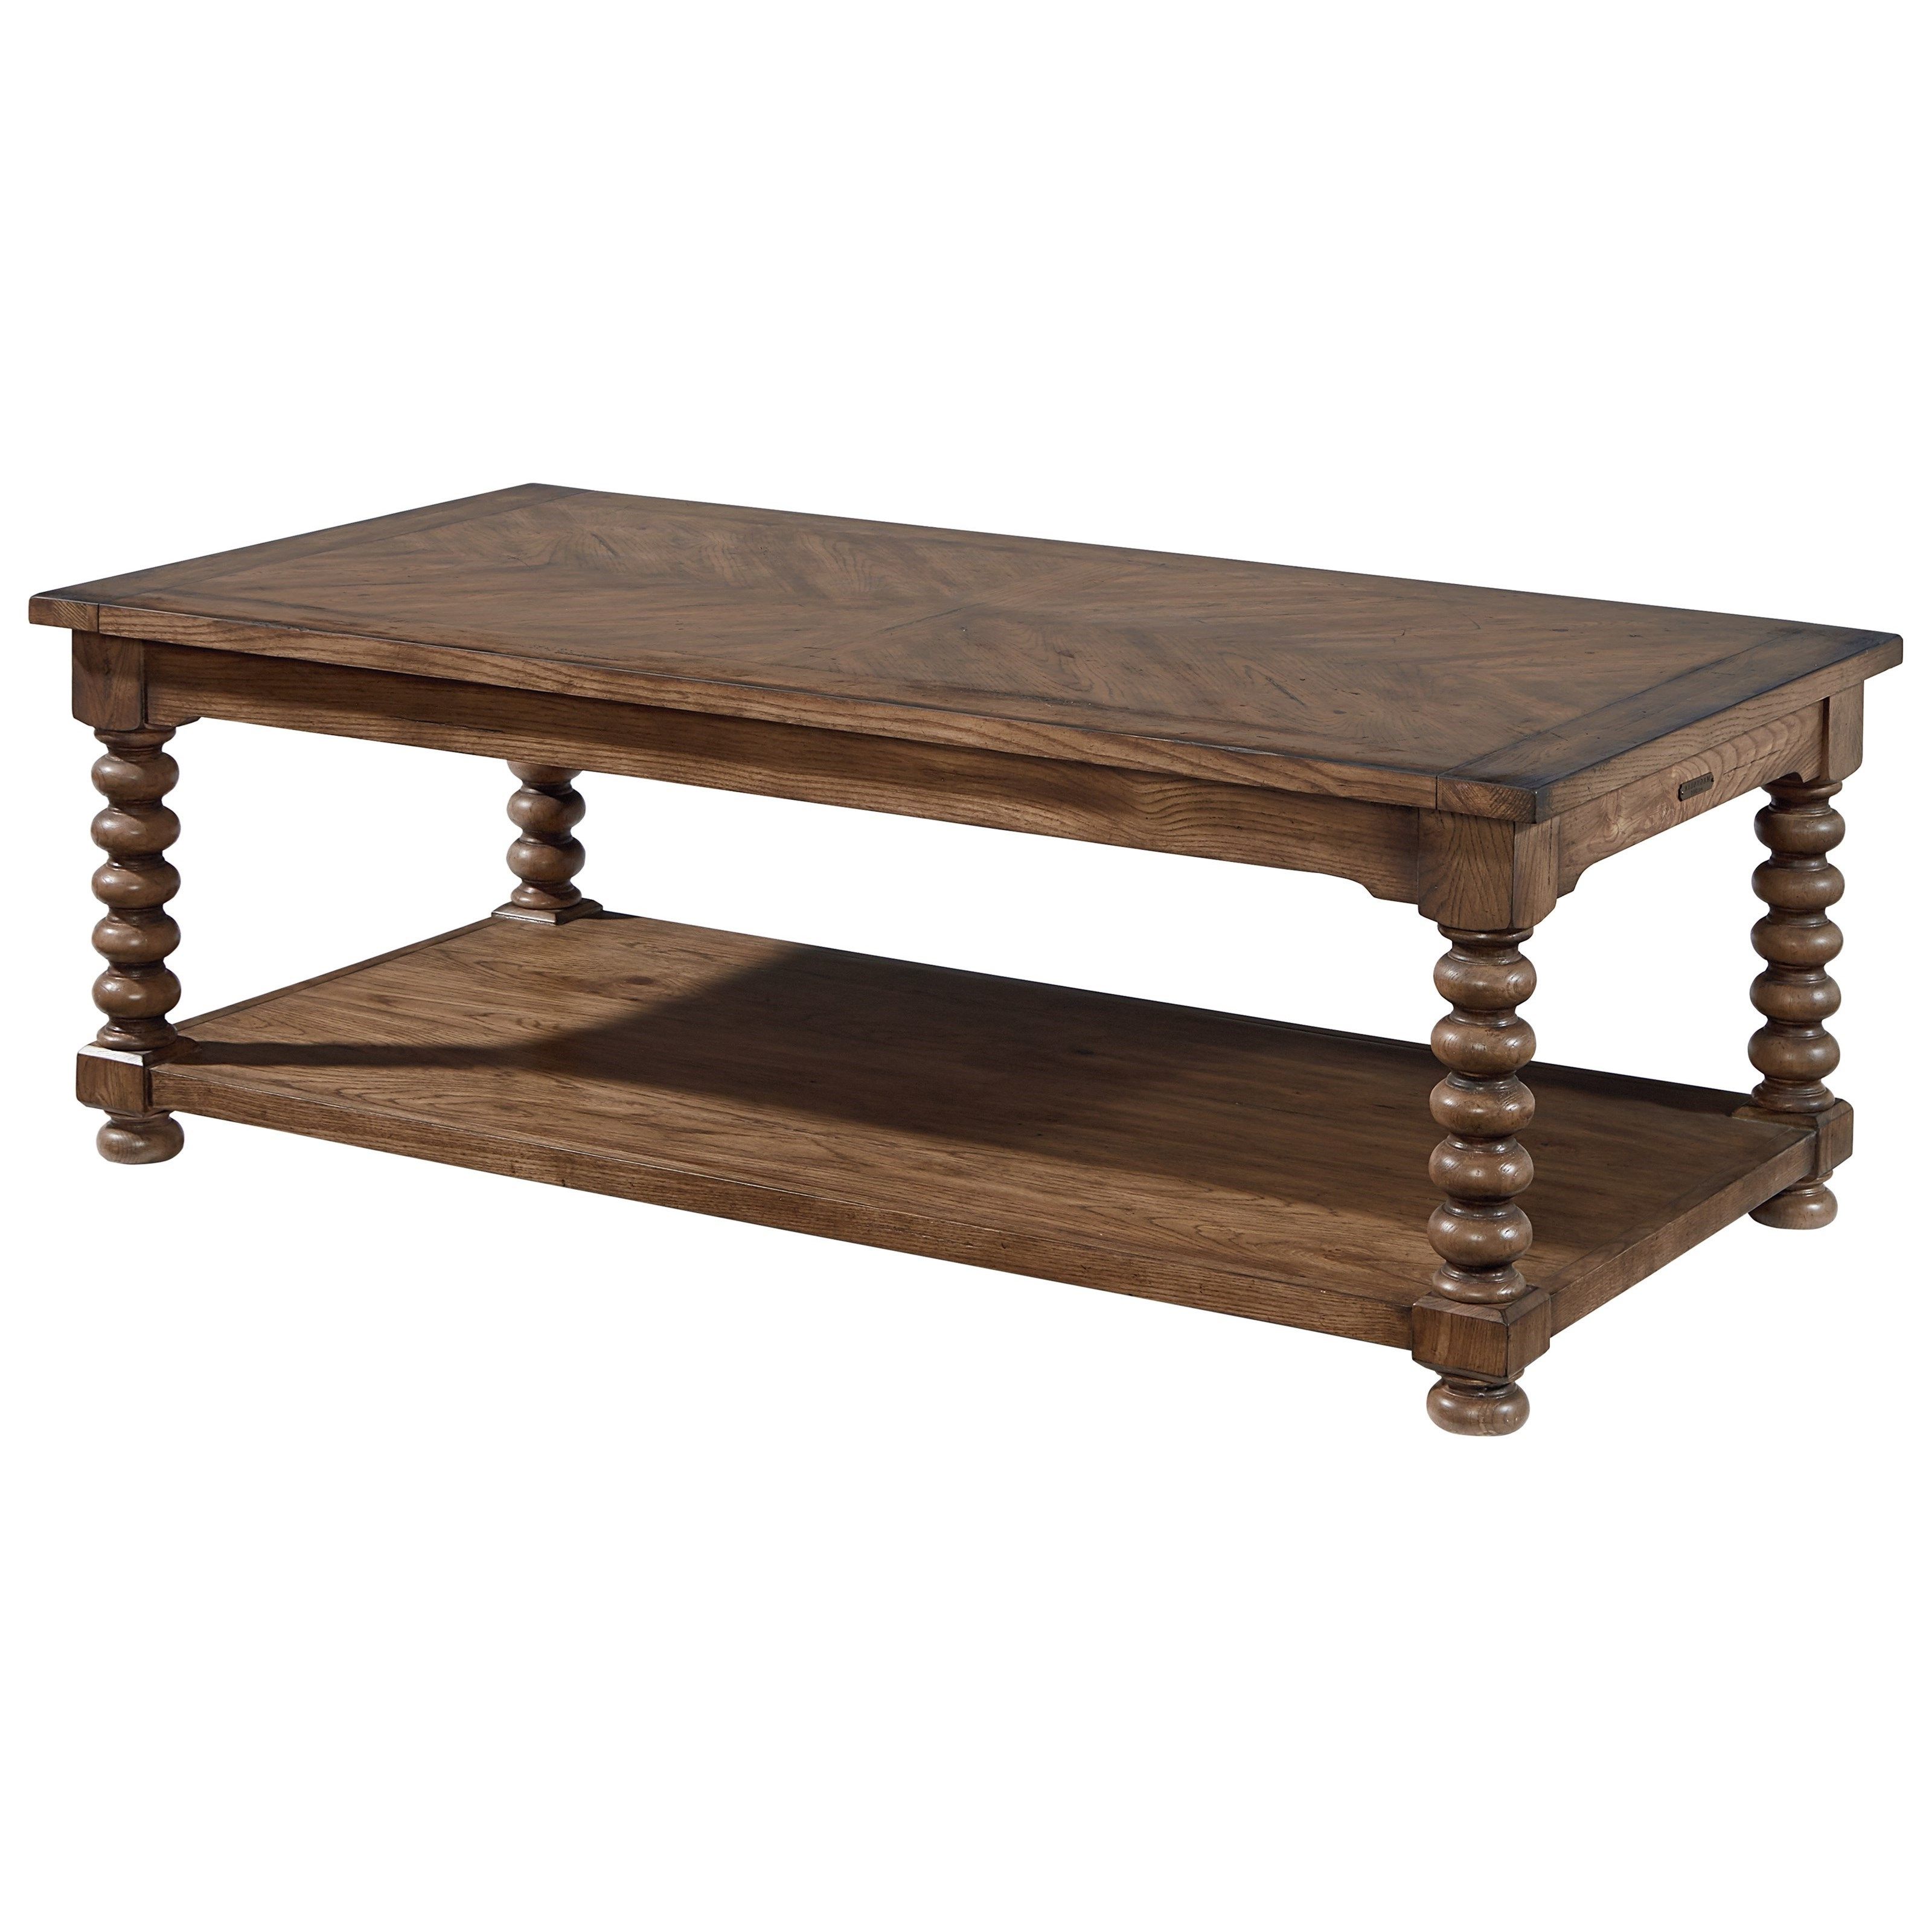 Most Current Traditional Coffee Tables Pertaining To Magnolia Homejoanna Gaines Traditional Coffee Table With Spool (View 1 of 20)